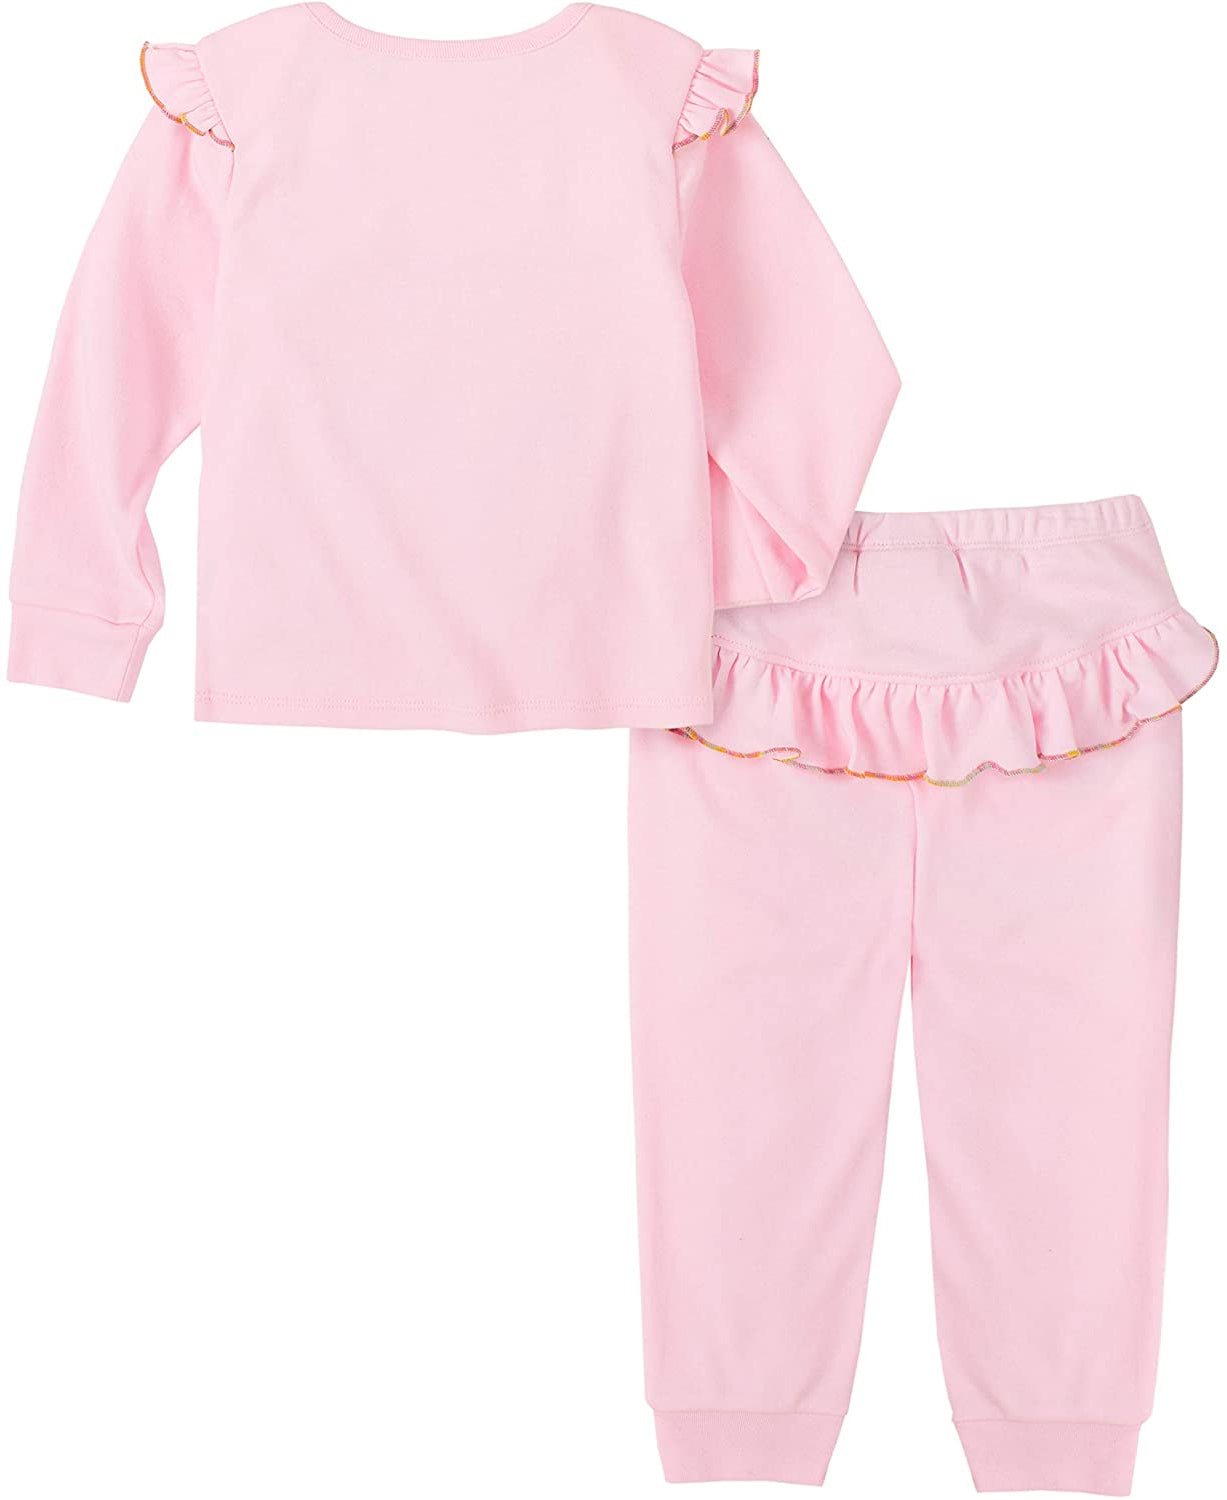 Juicy Couture Girls 12-24 Months Crown Ruffle Pant Set